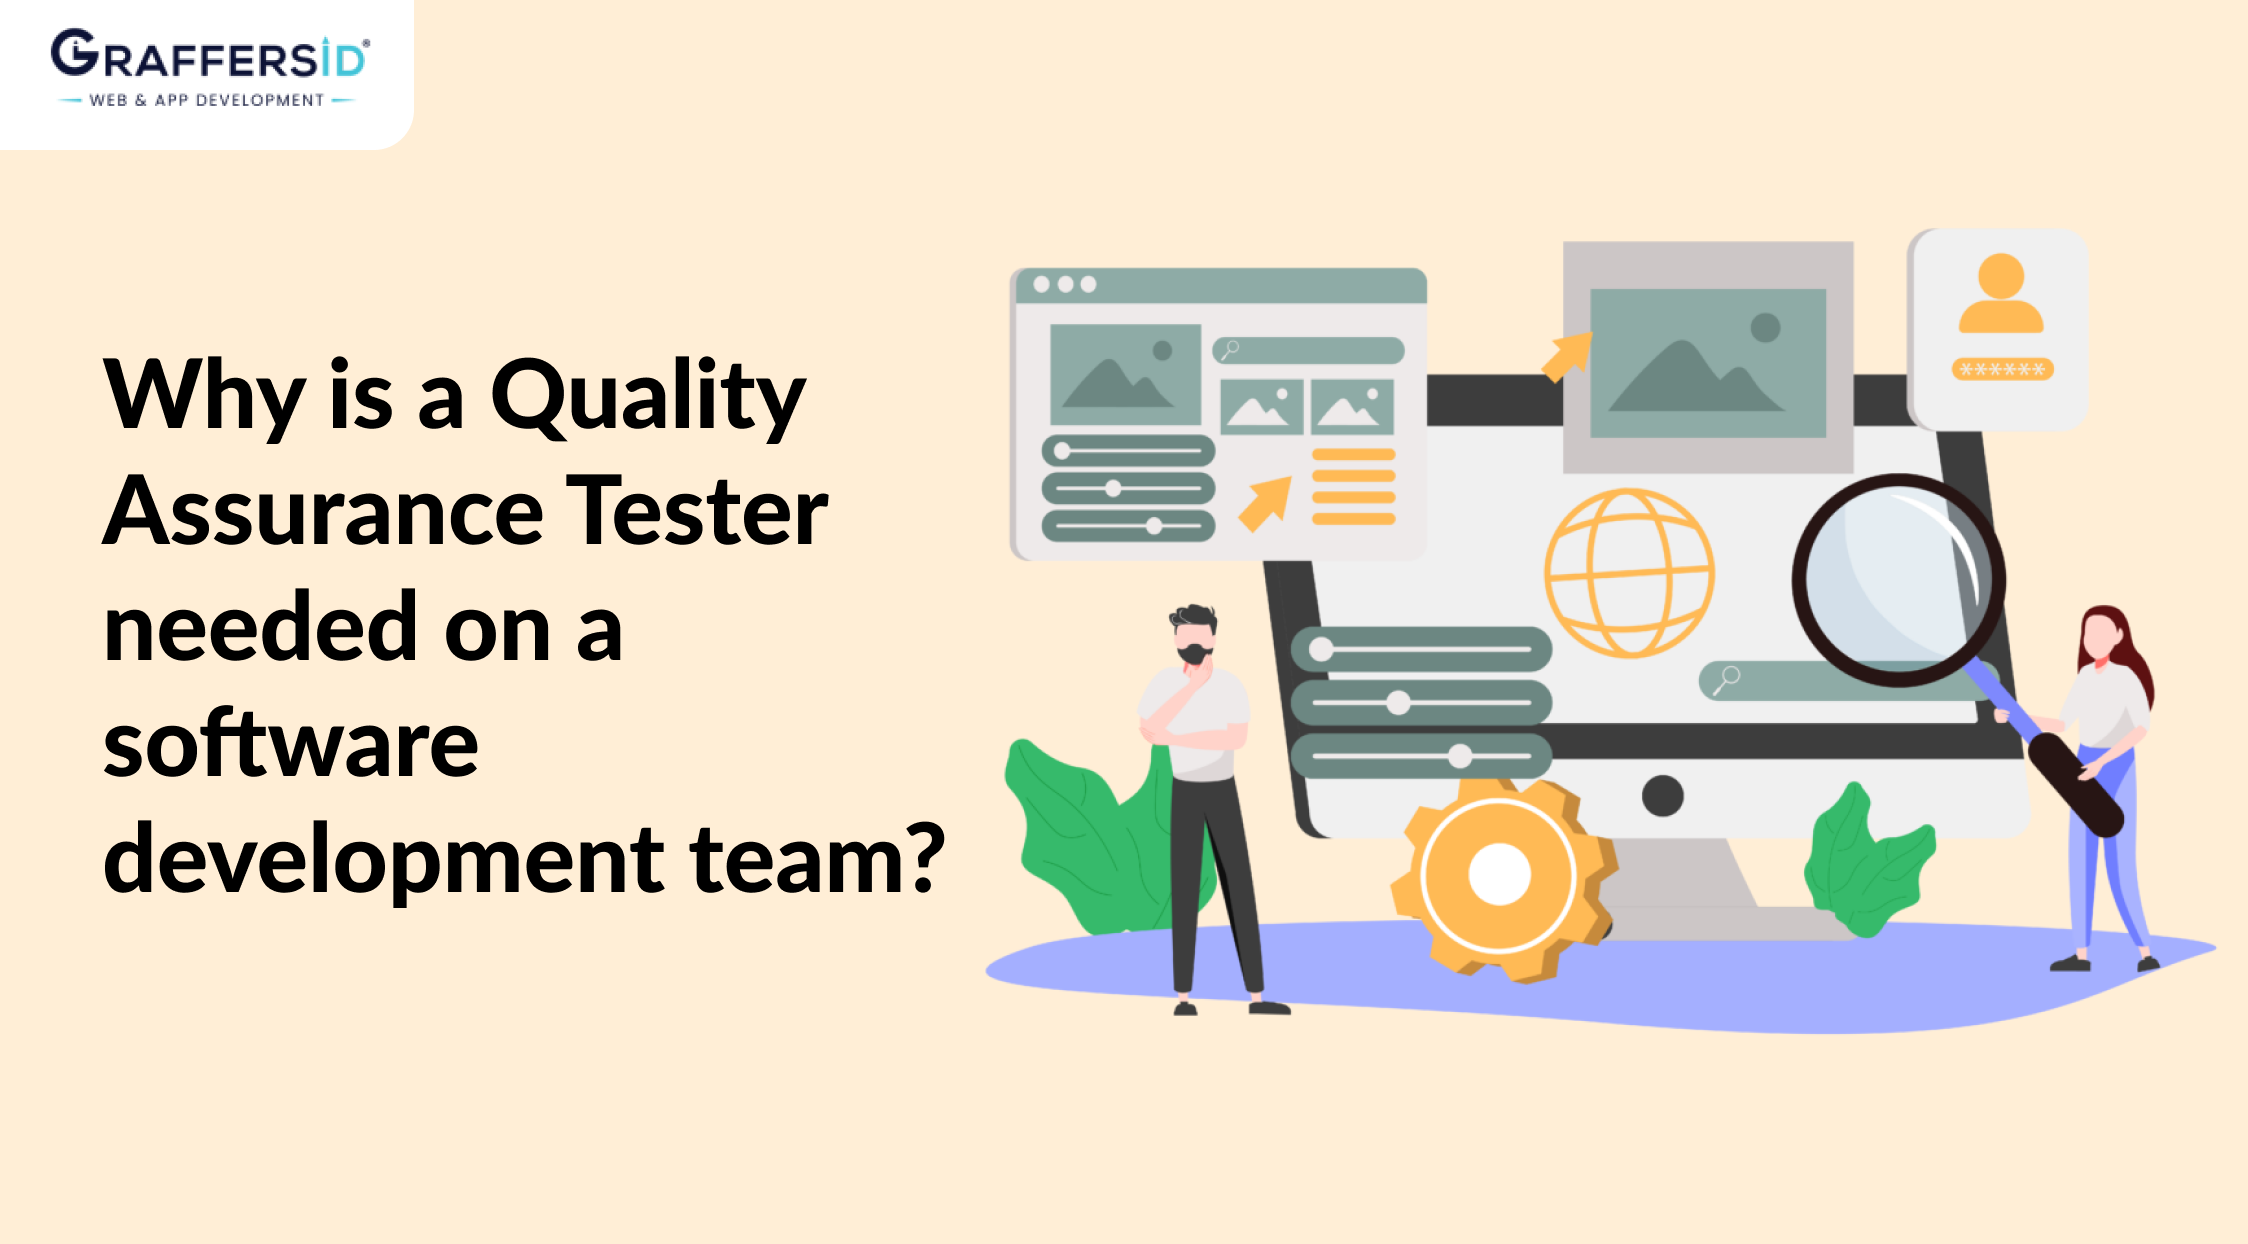 Why is a Quality Assurance Tester Needed on a Software Development Team?